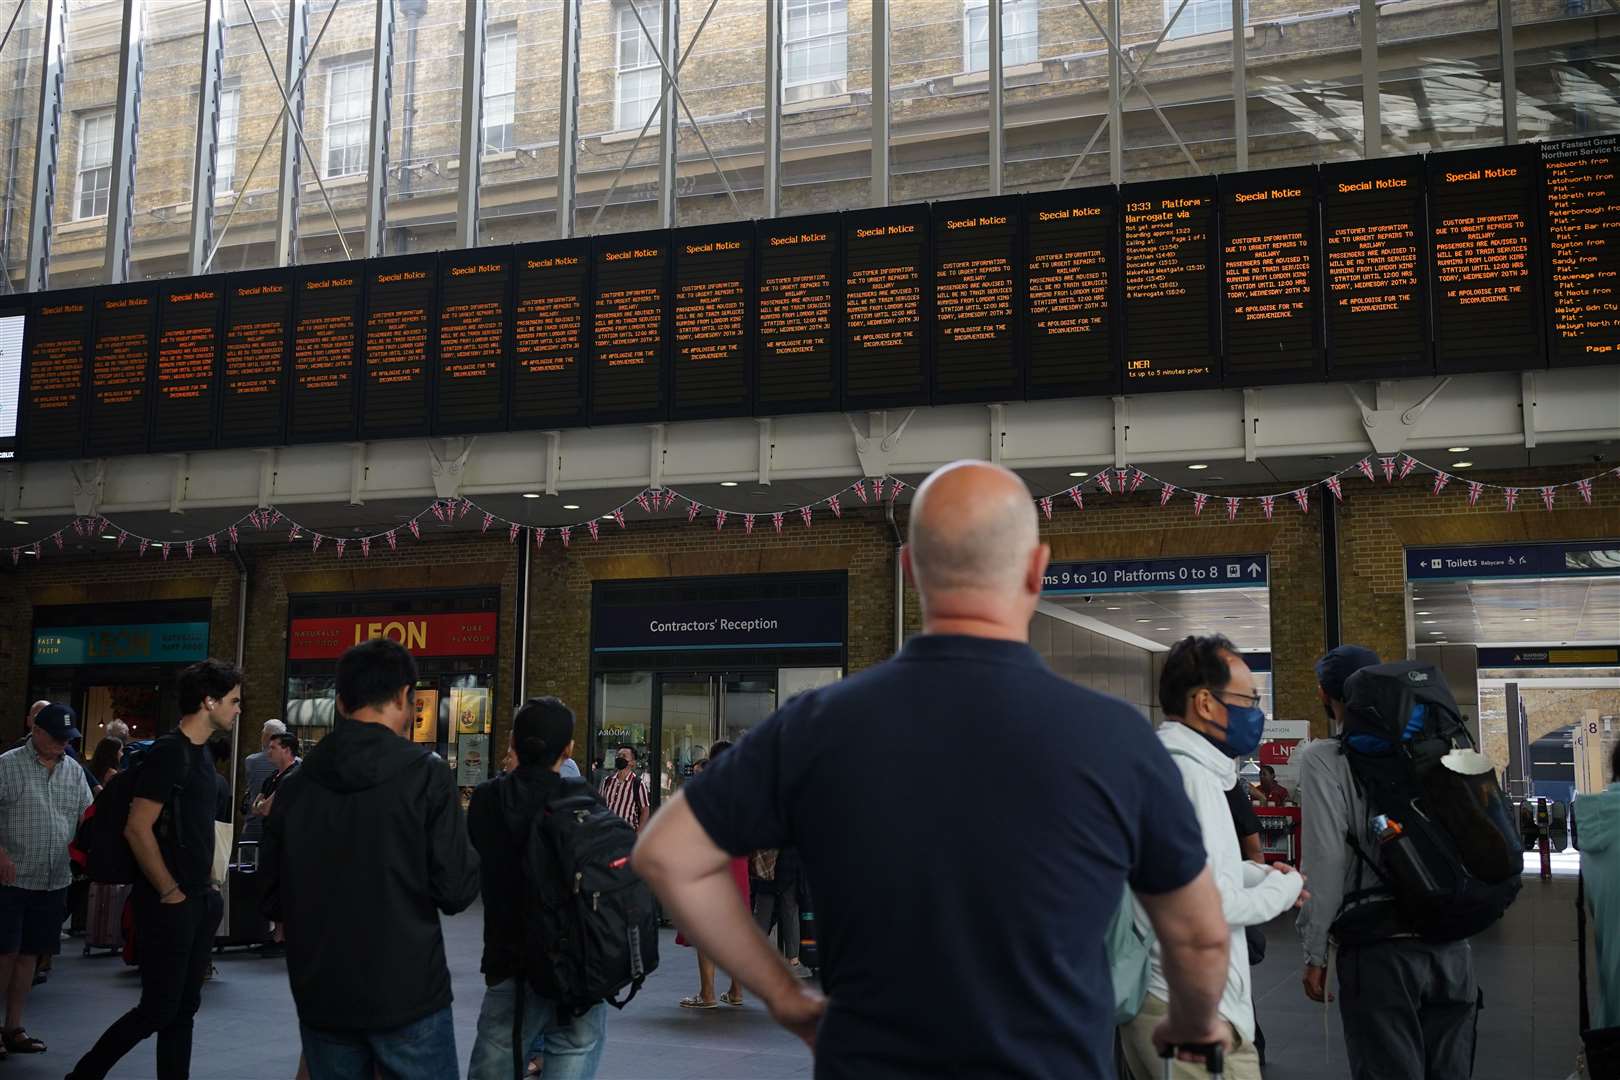 Departure boards at King’s Cross station in London (Yui Mok/PA)